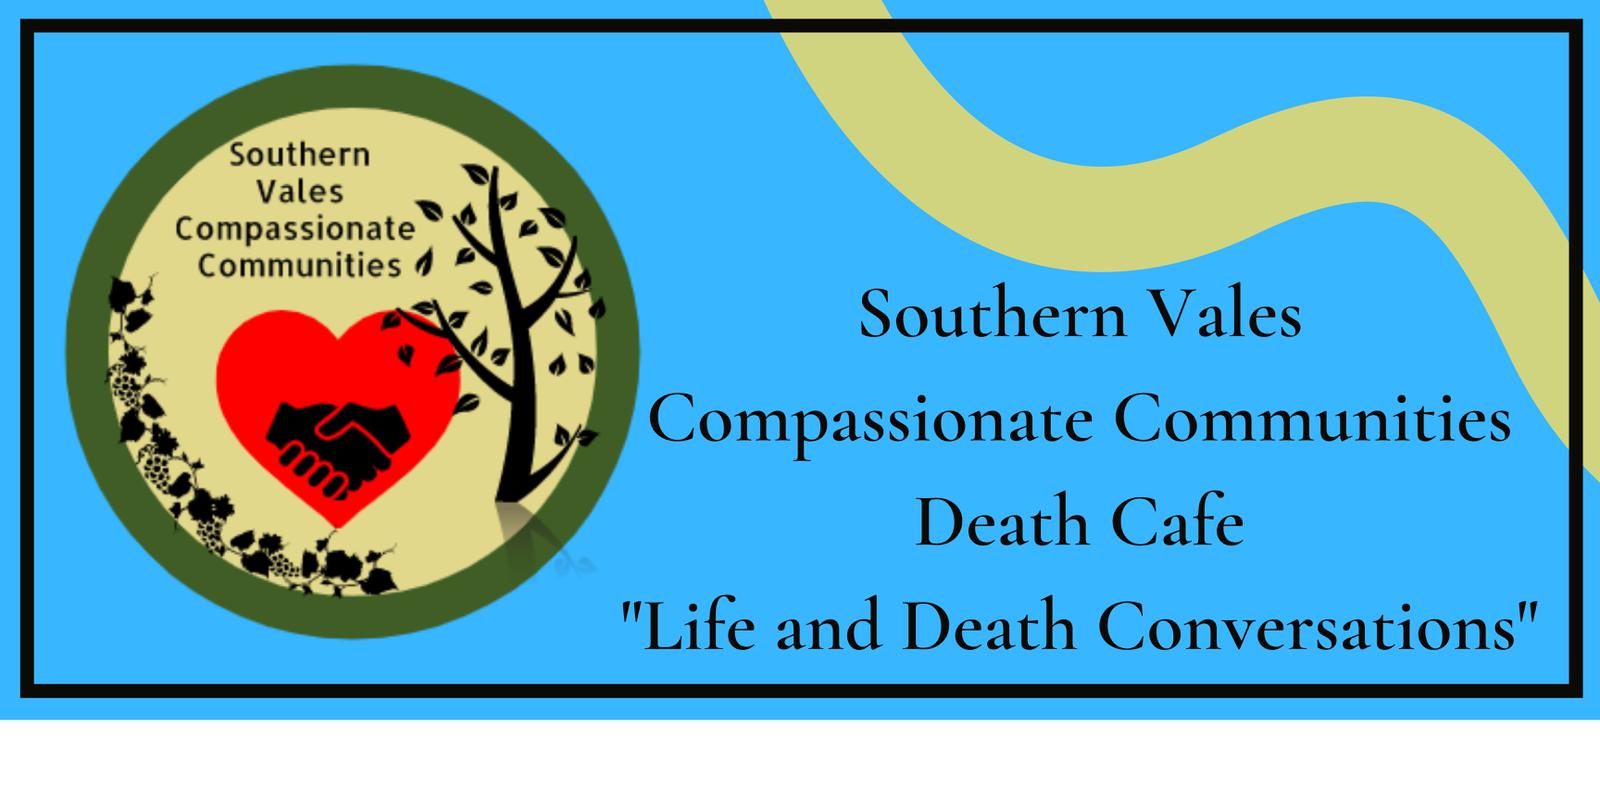 Death Cafe Compassionate Communities Southern Vales Death Cafe